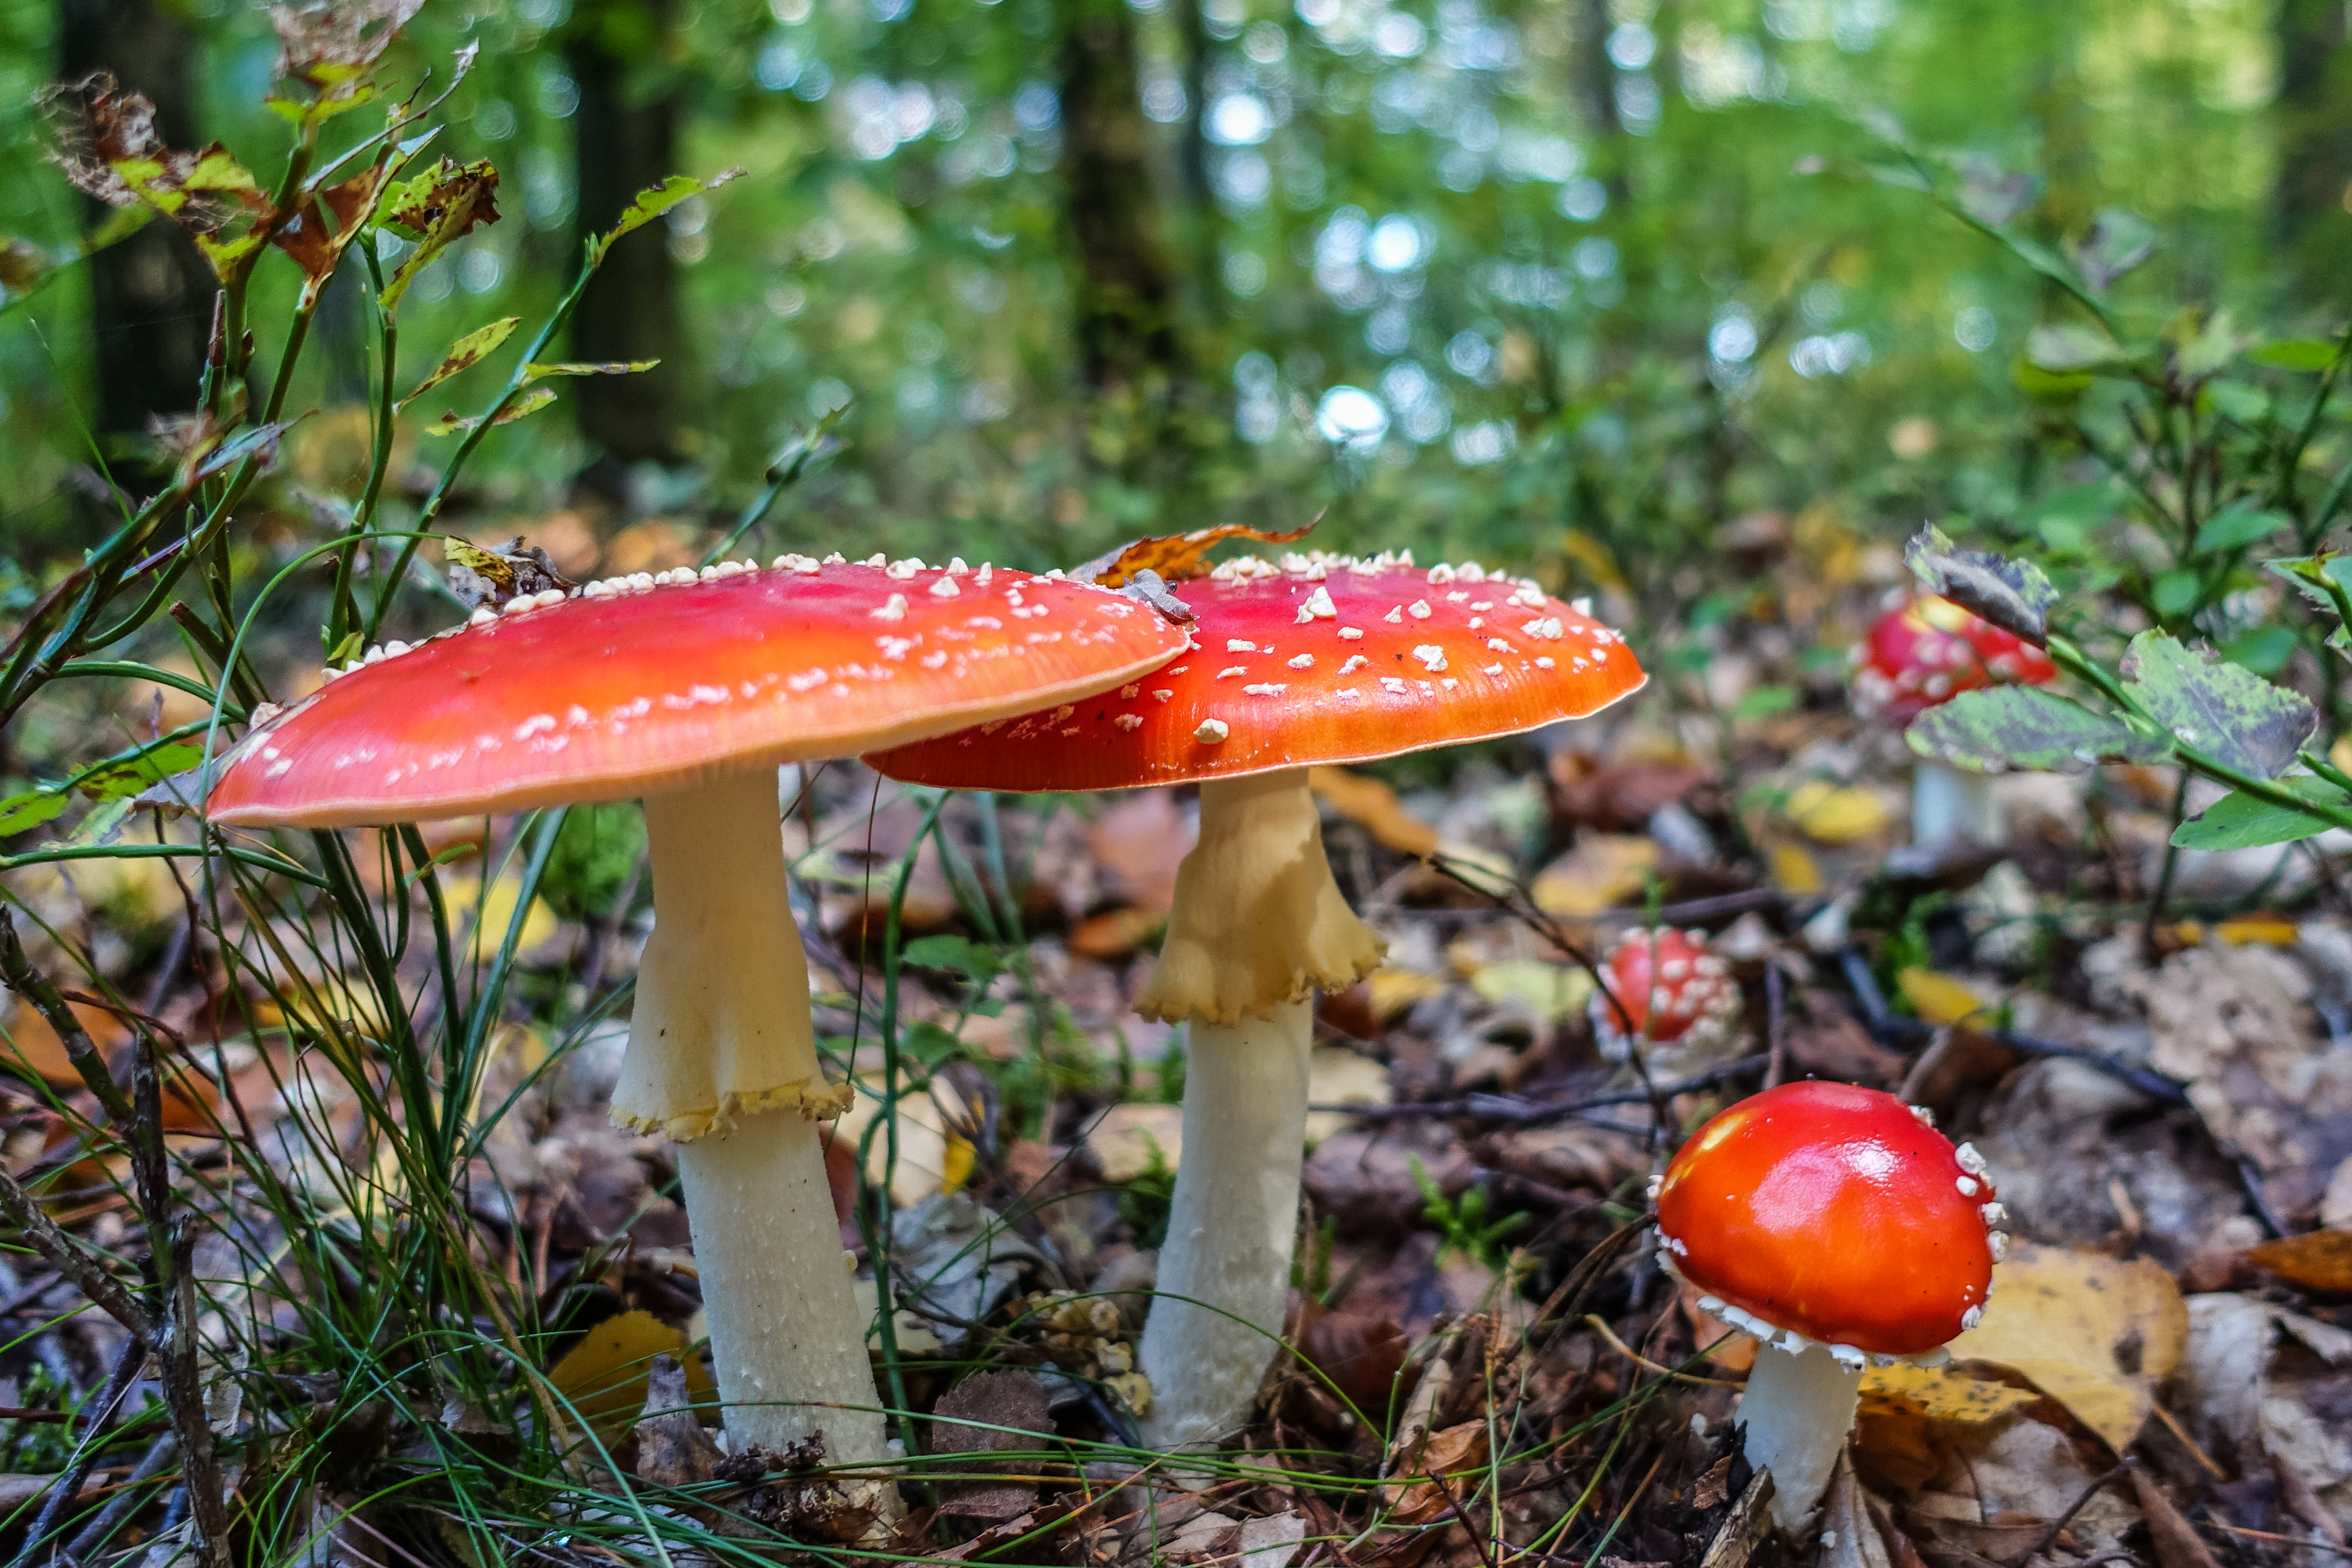 A close-up of red-capped mushrooms on a forest floor.